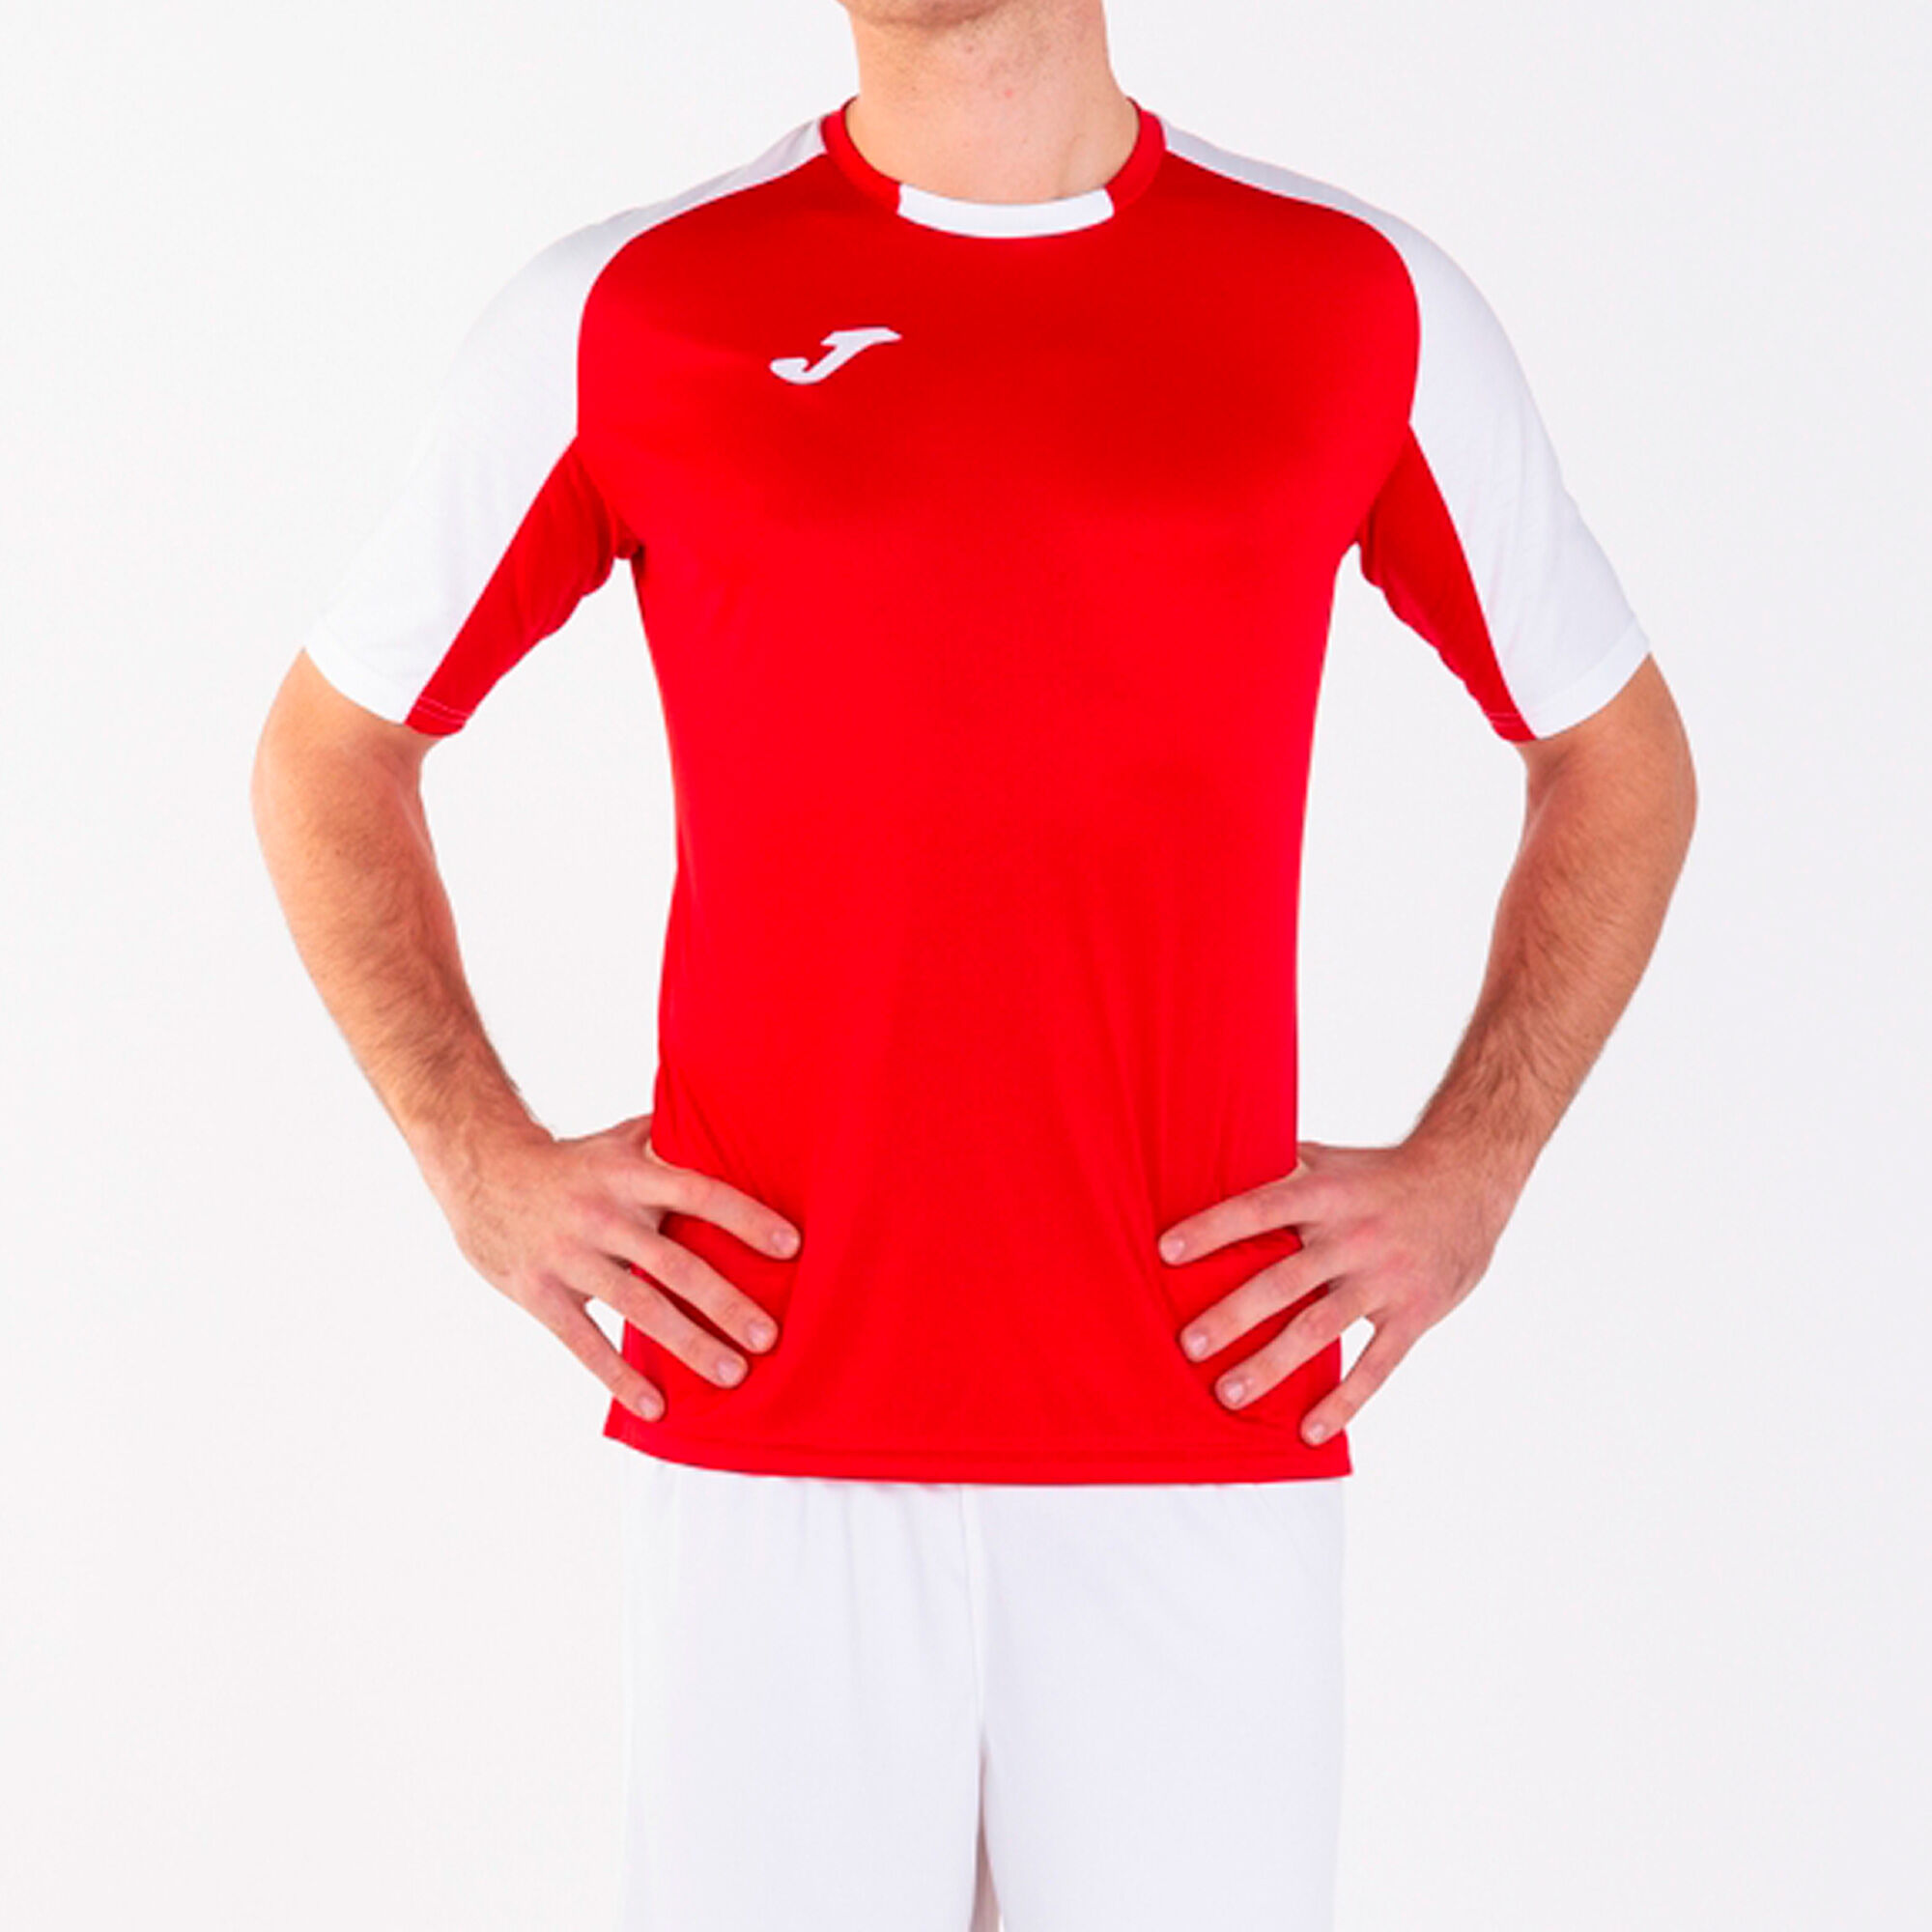 MAILLOT MANCHES COURTES HOMME ESSENTIAL ROUGE BLANC